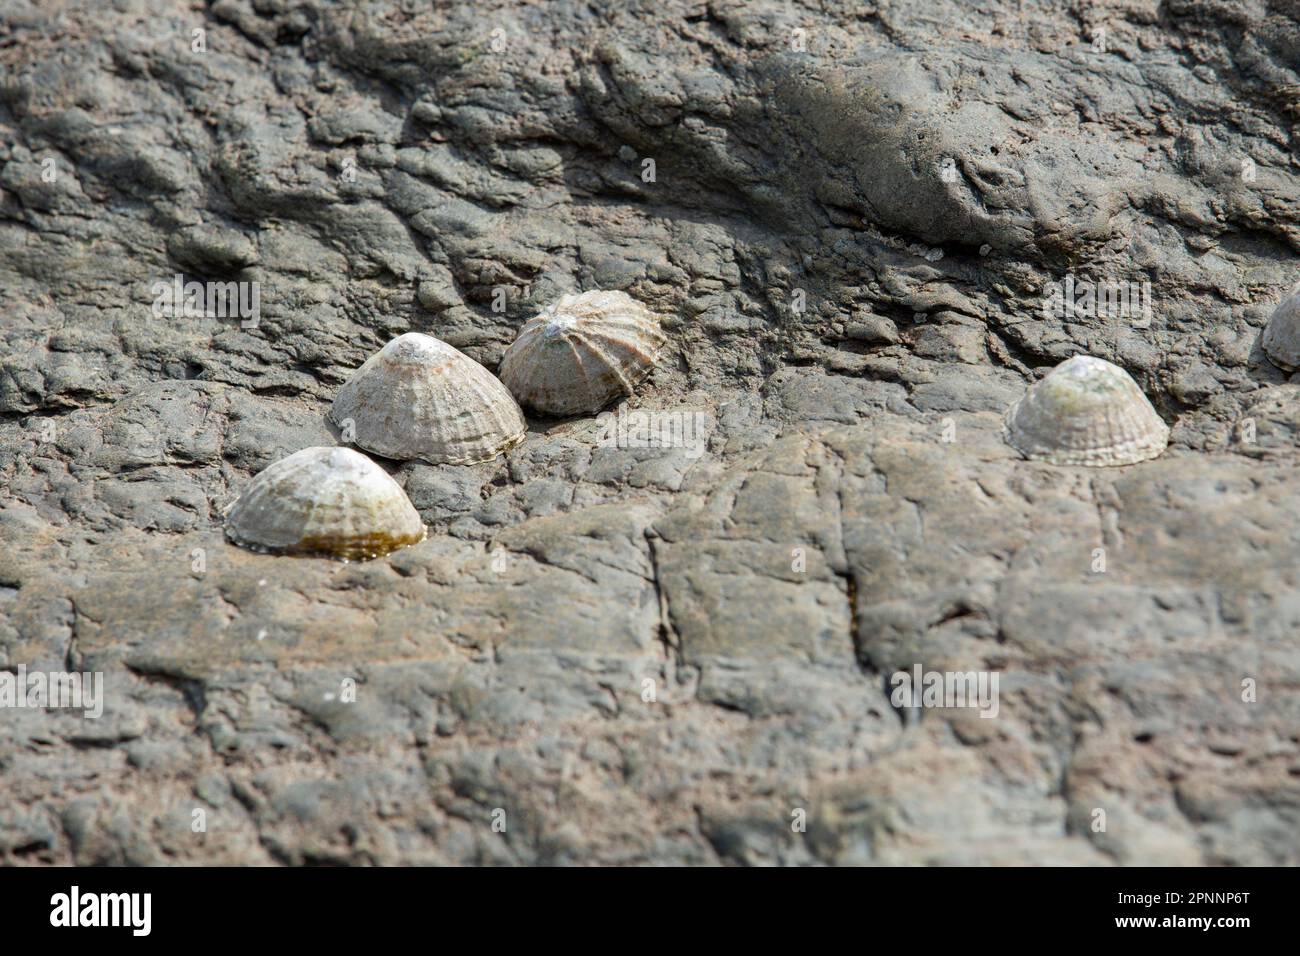 Limpets on rock in rocky shore tide pool or rock pool, Scutellastra granularis, Granular limpet Stock Photo